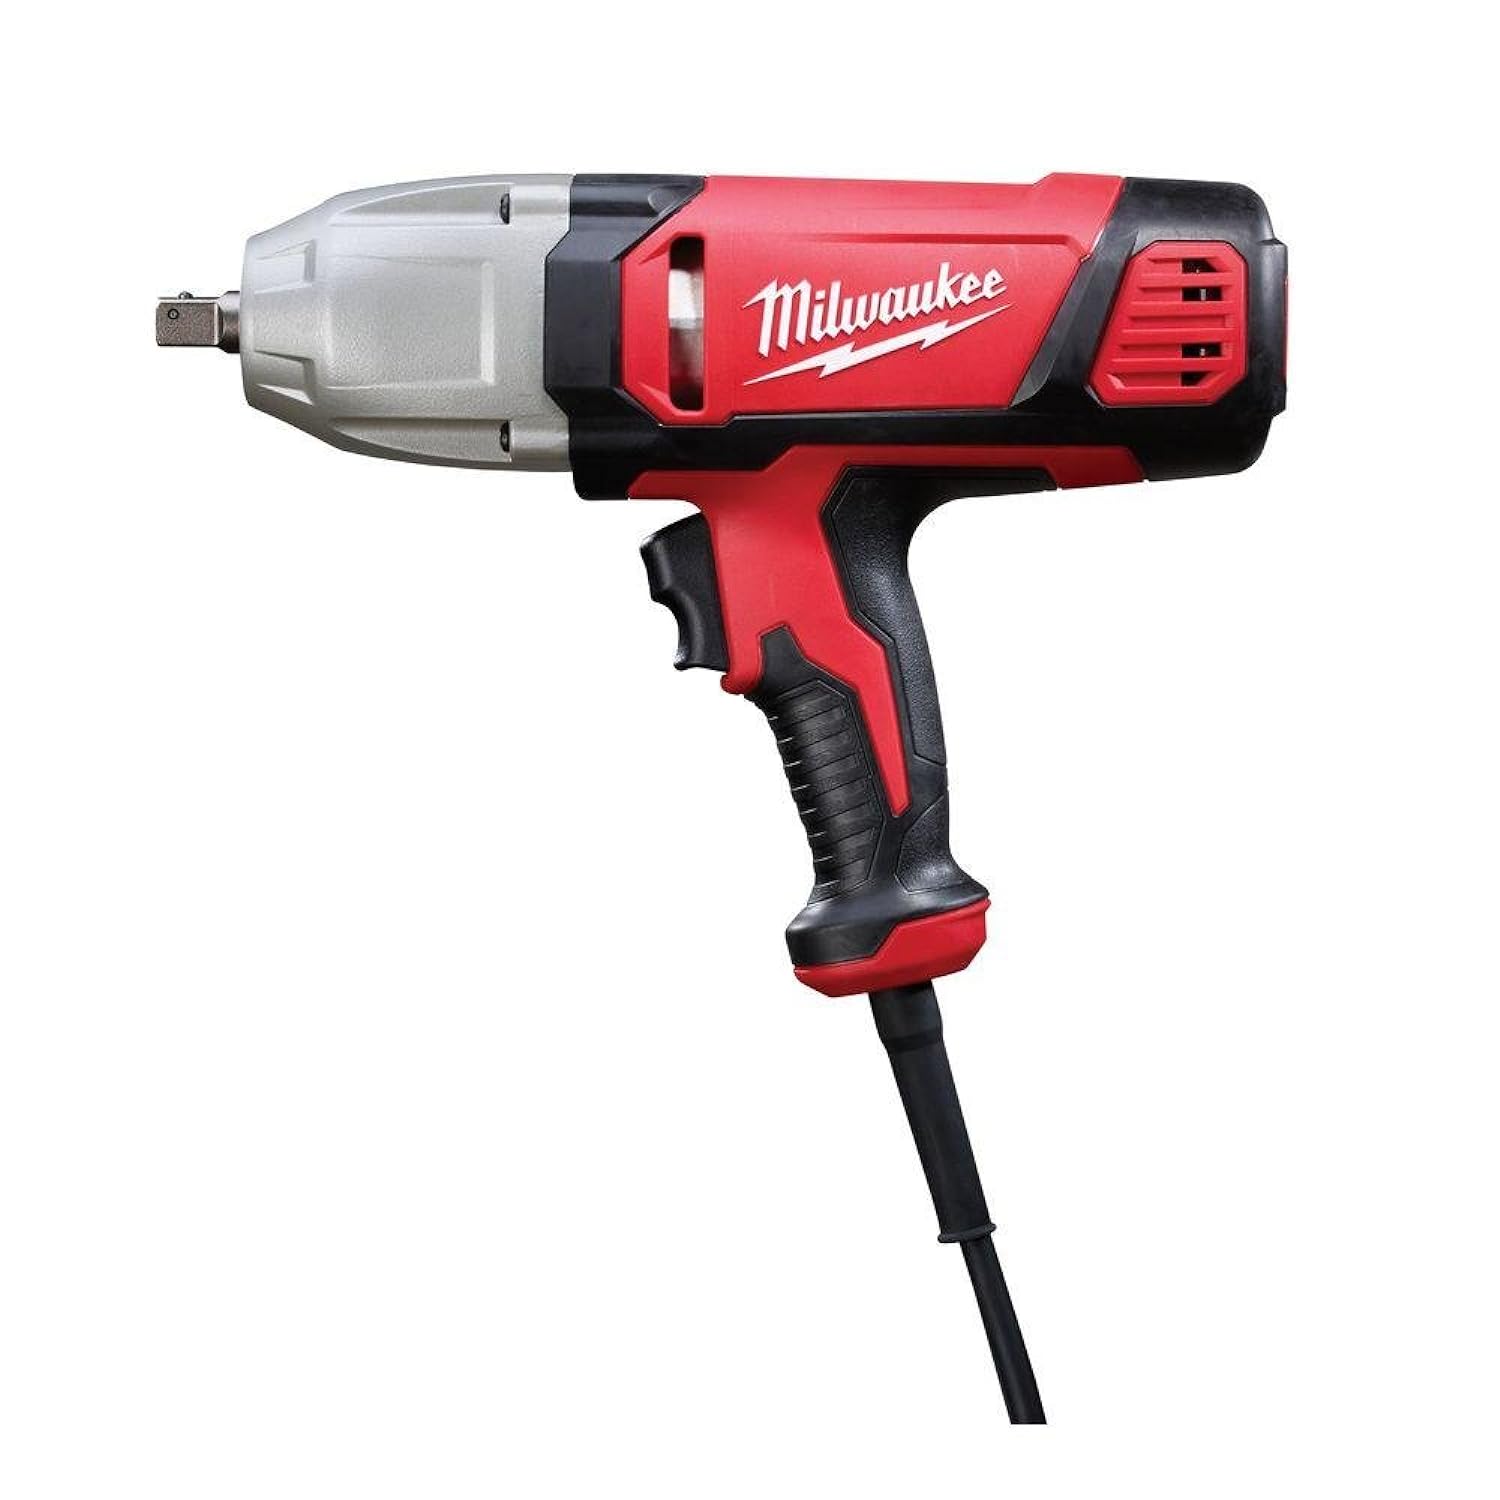 MILWAUKEE'S Impact Wrench, 120VAC, 7.0 Amps, 1/2" (9070-20)